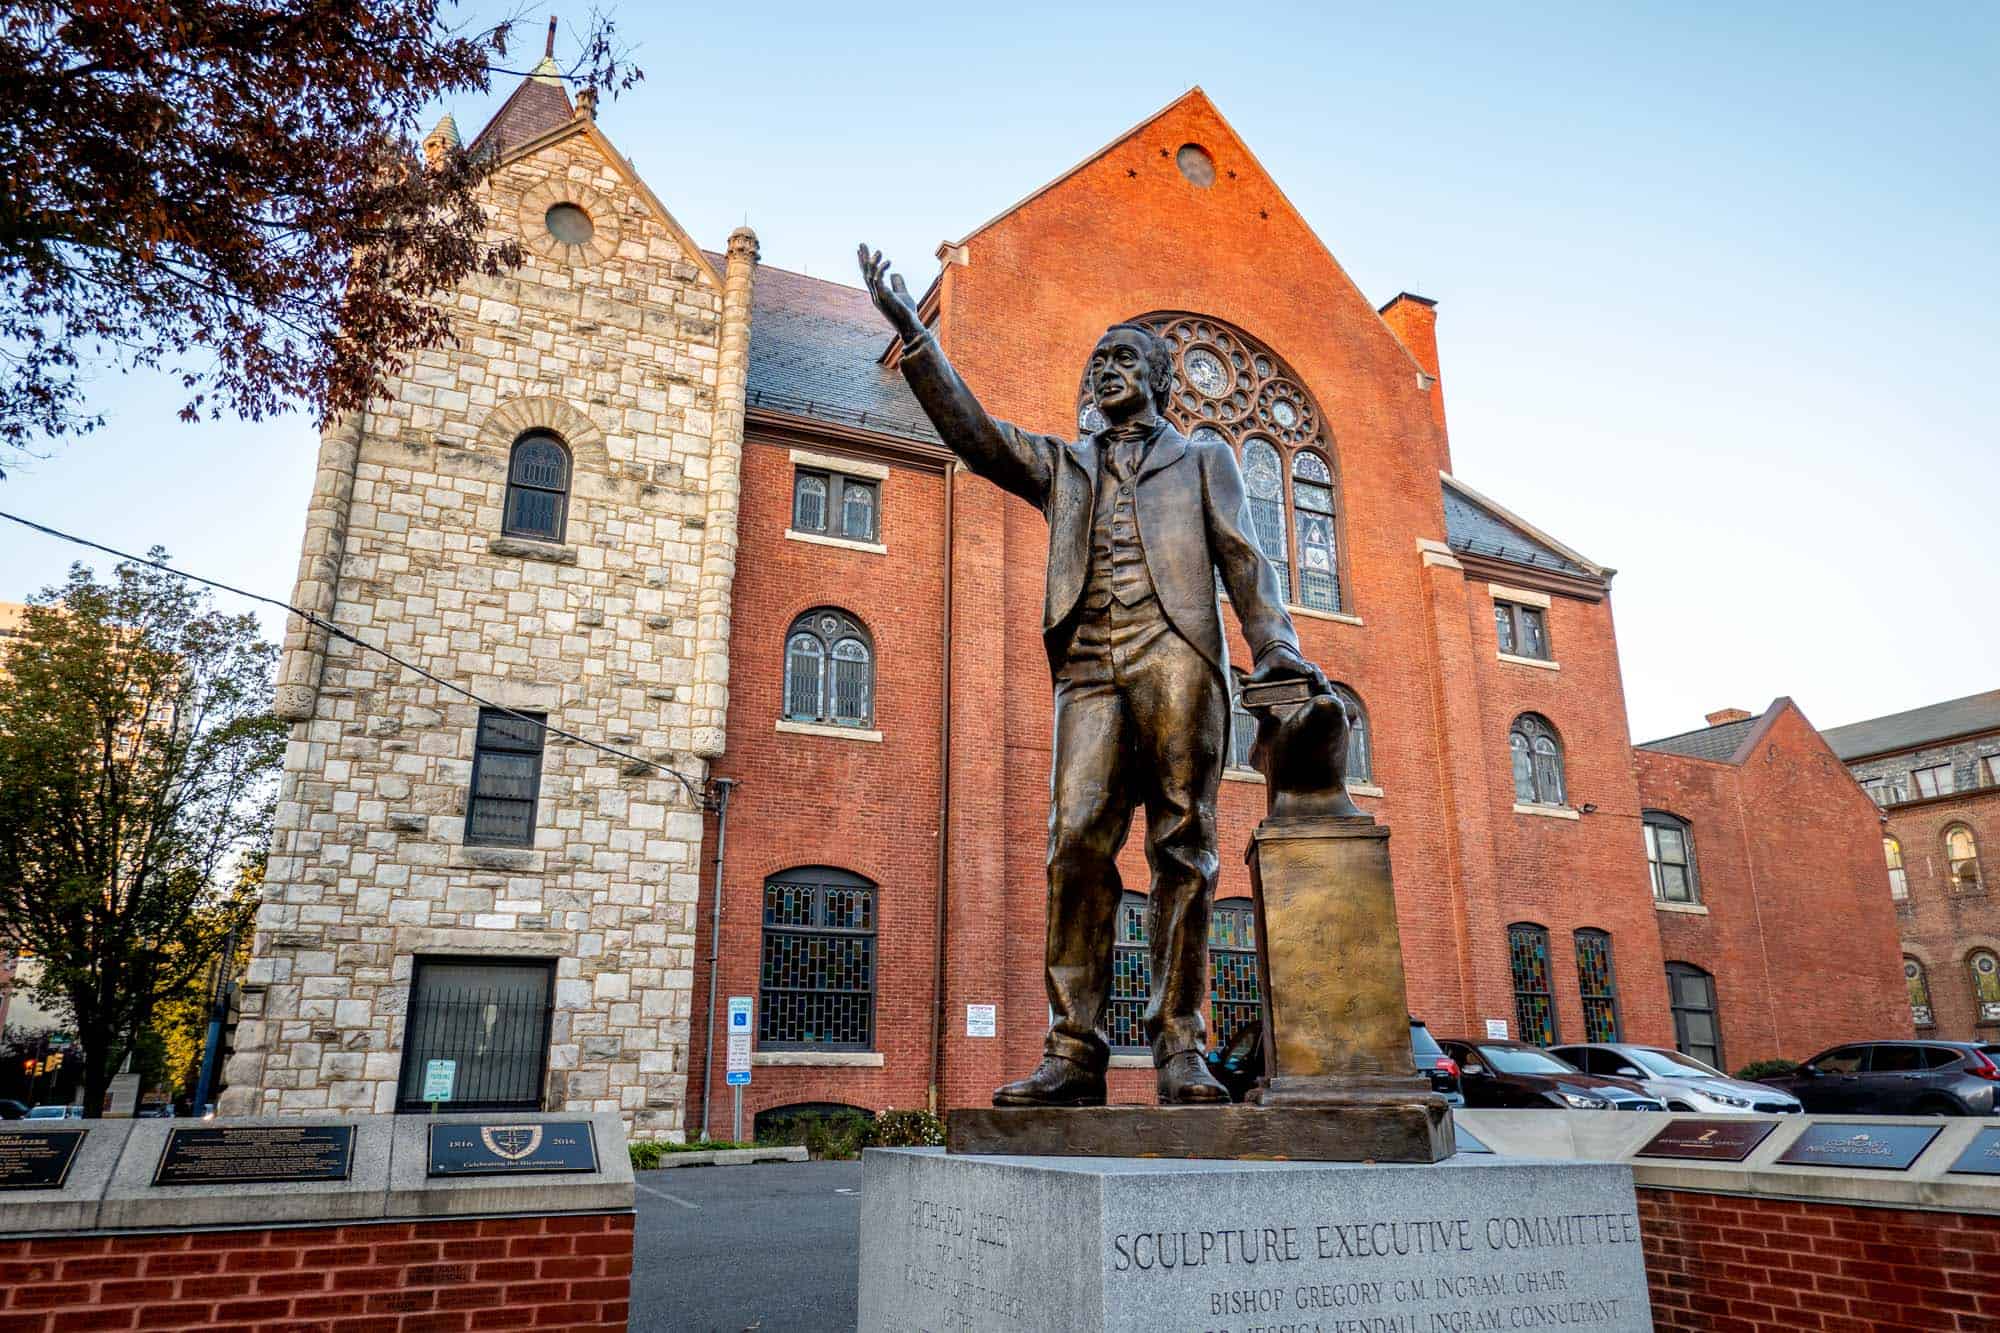 Bronze statue of a man in front of a red brick building with stained glass windows